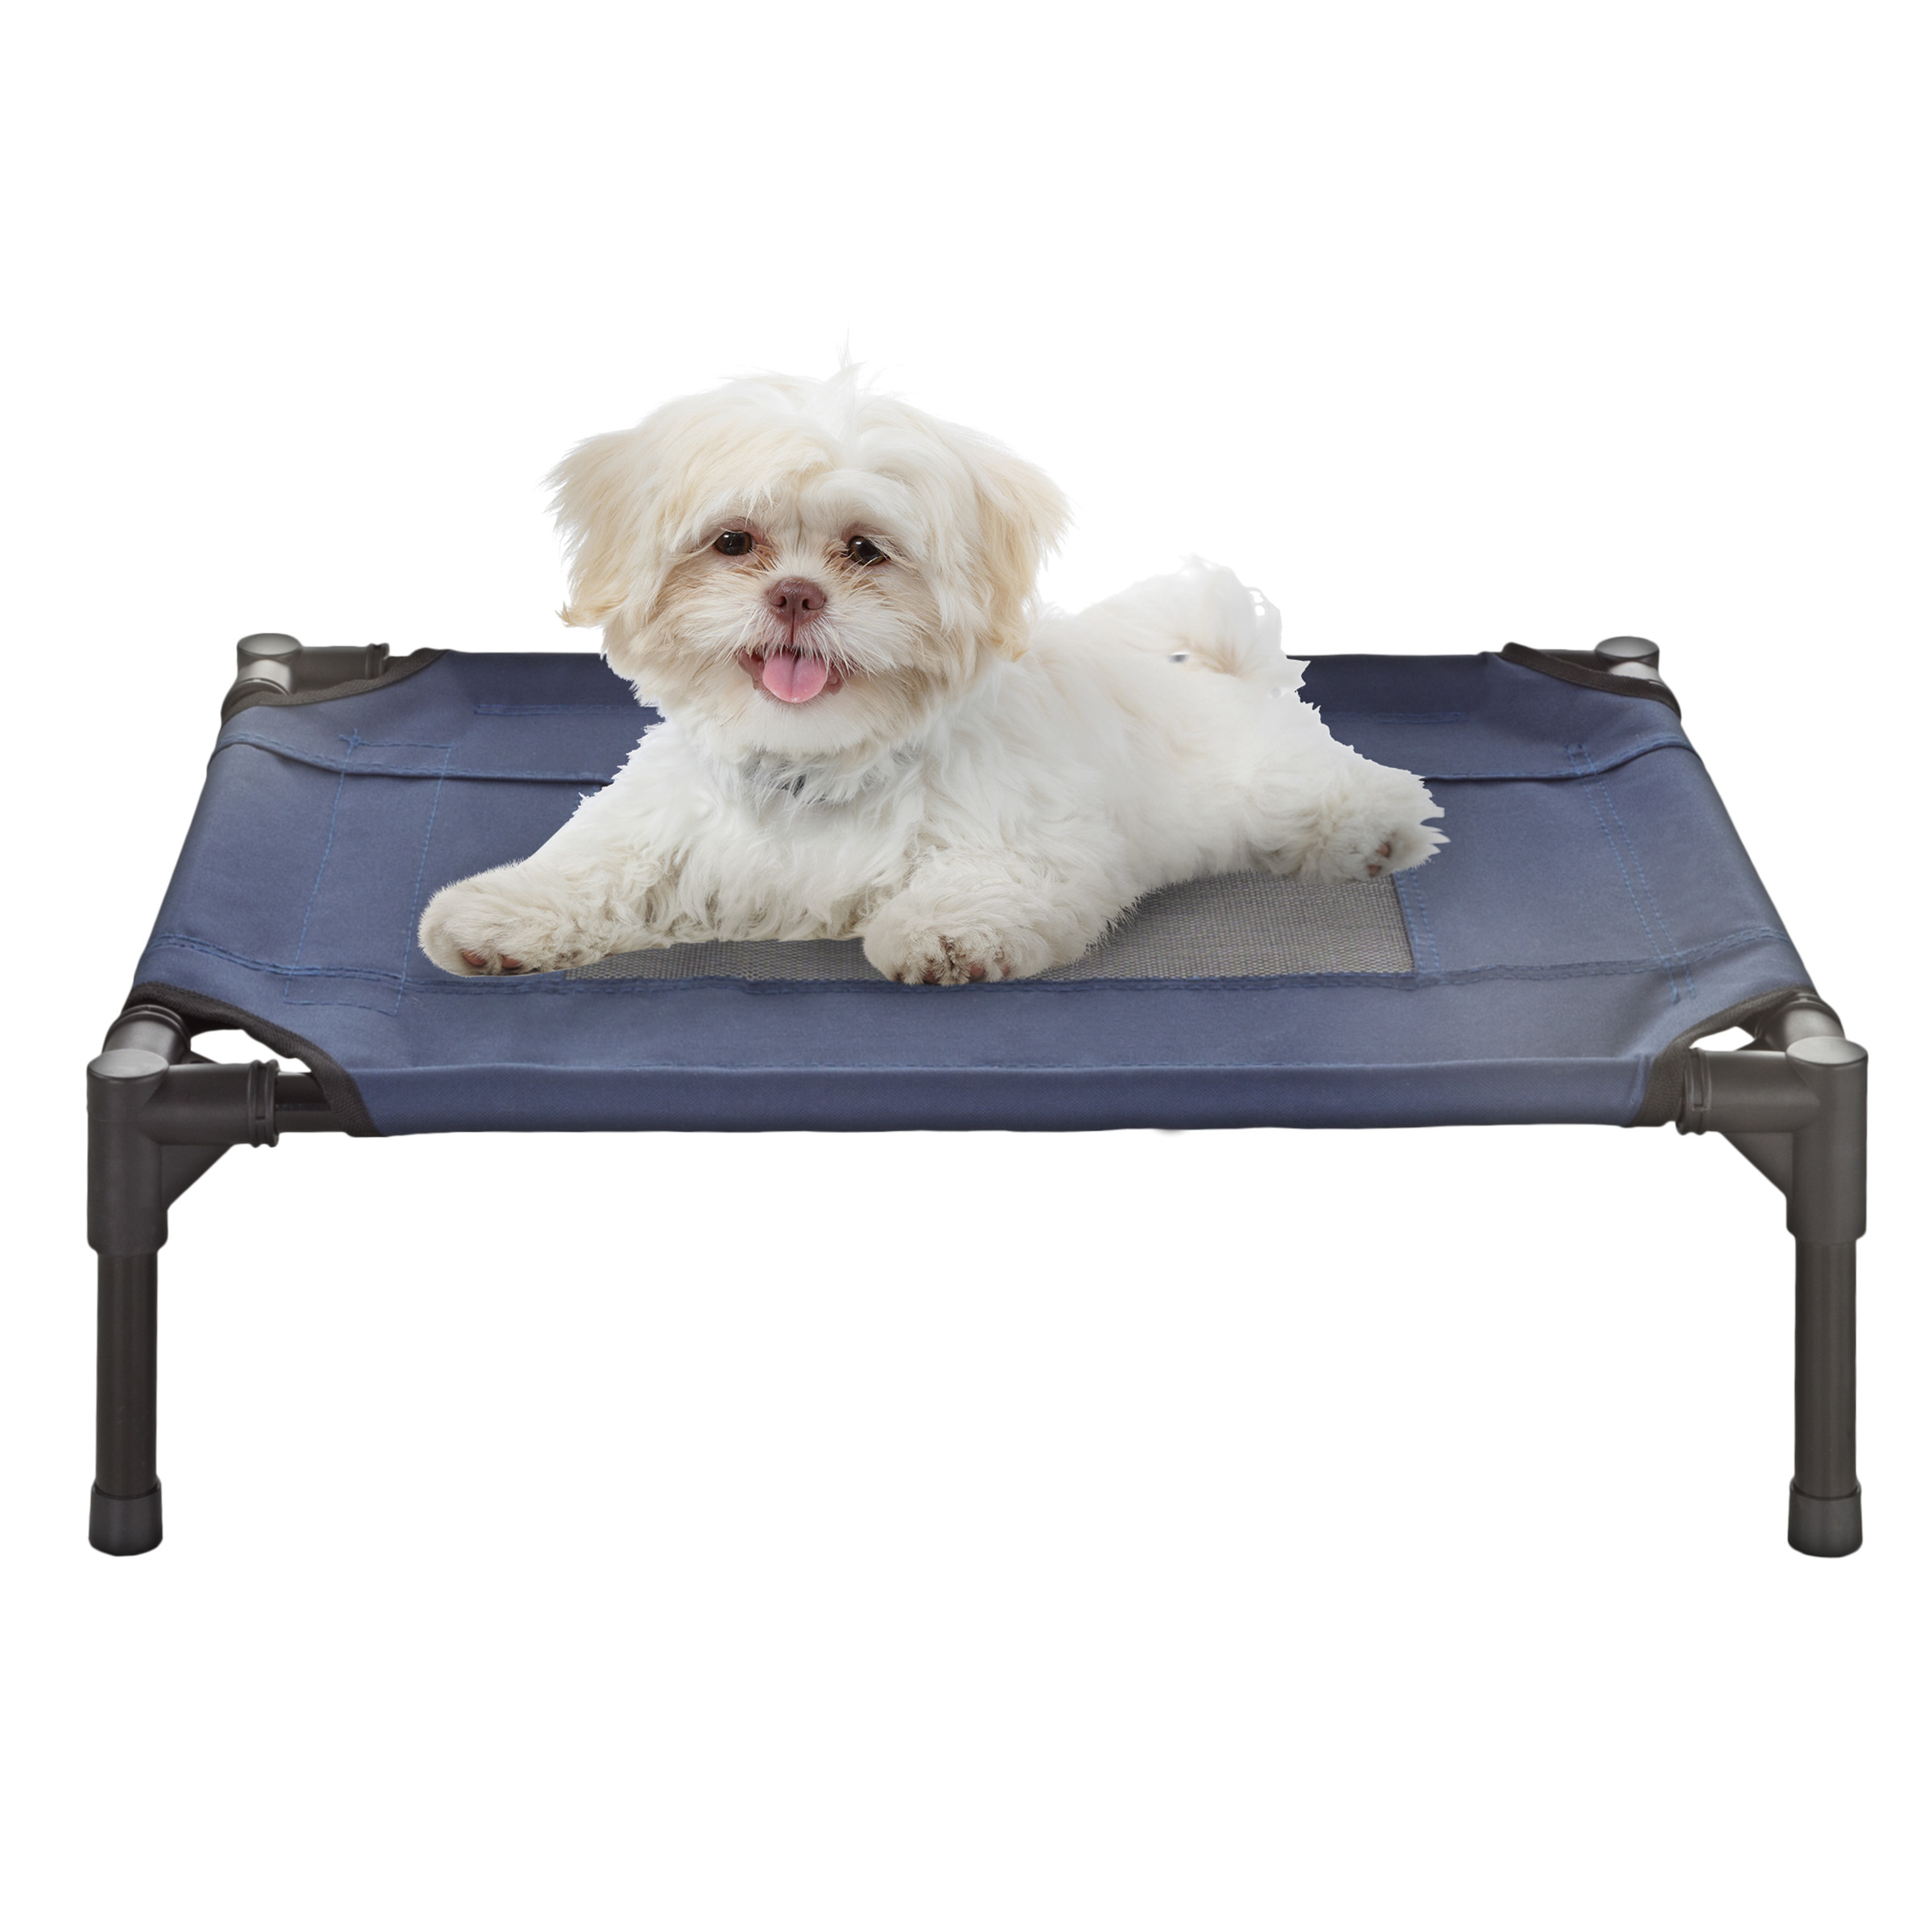 XSmall Dog Cat Bed Indoor Outdoor Raised Elevated Cot 24 X 18 Inch Camping Travel